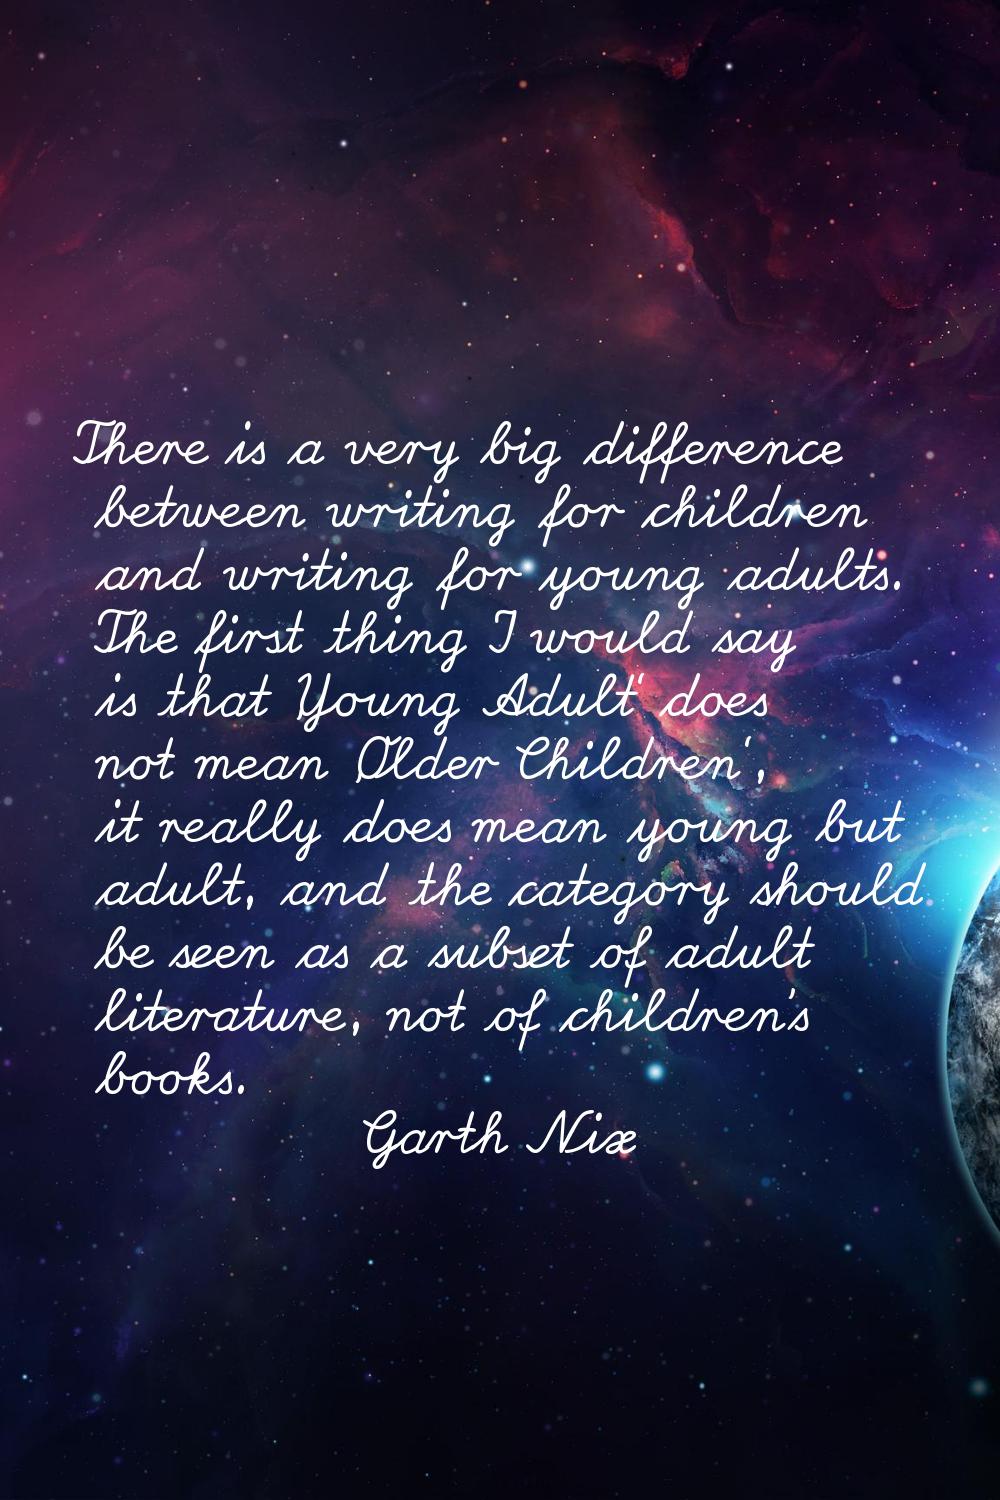 There is a very big difference between writing for children and writing for young adults. The first